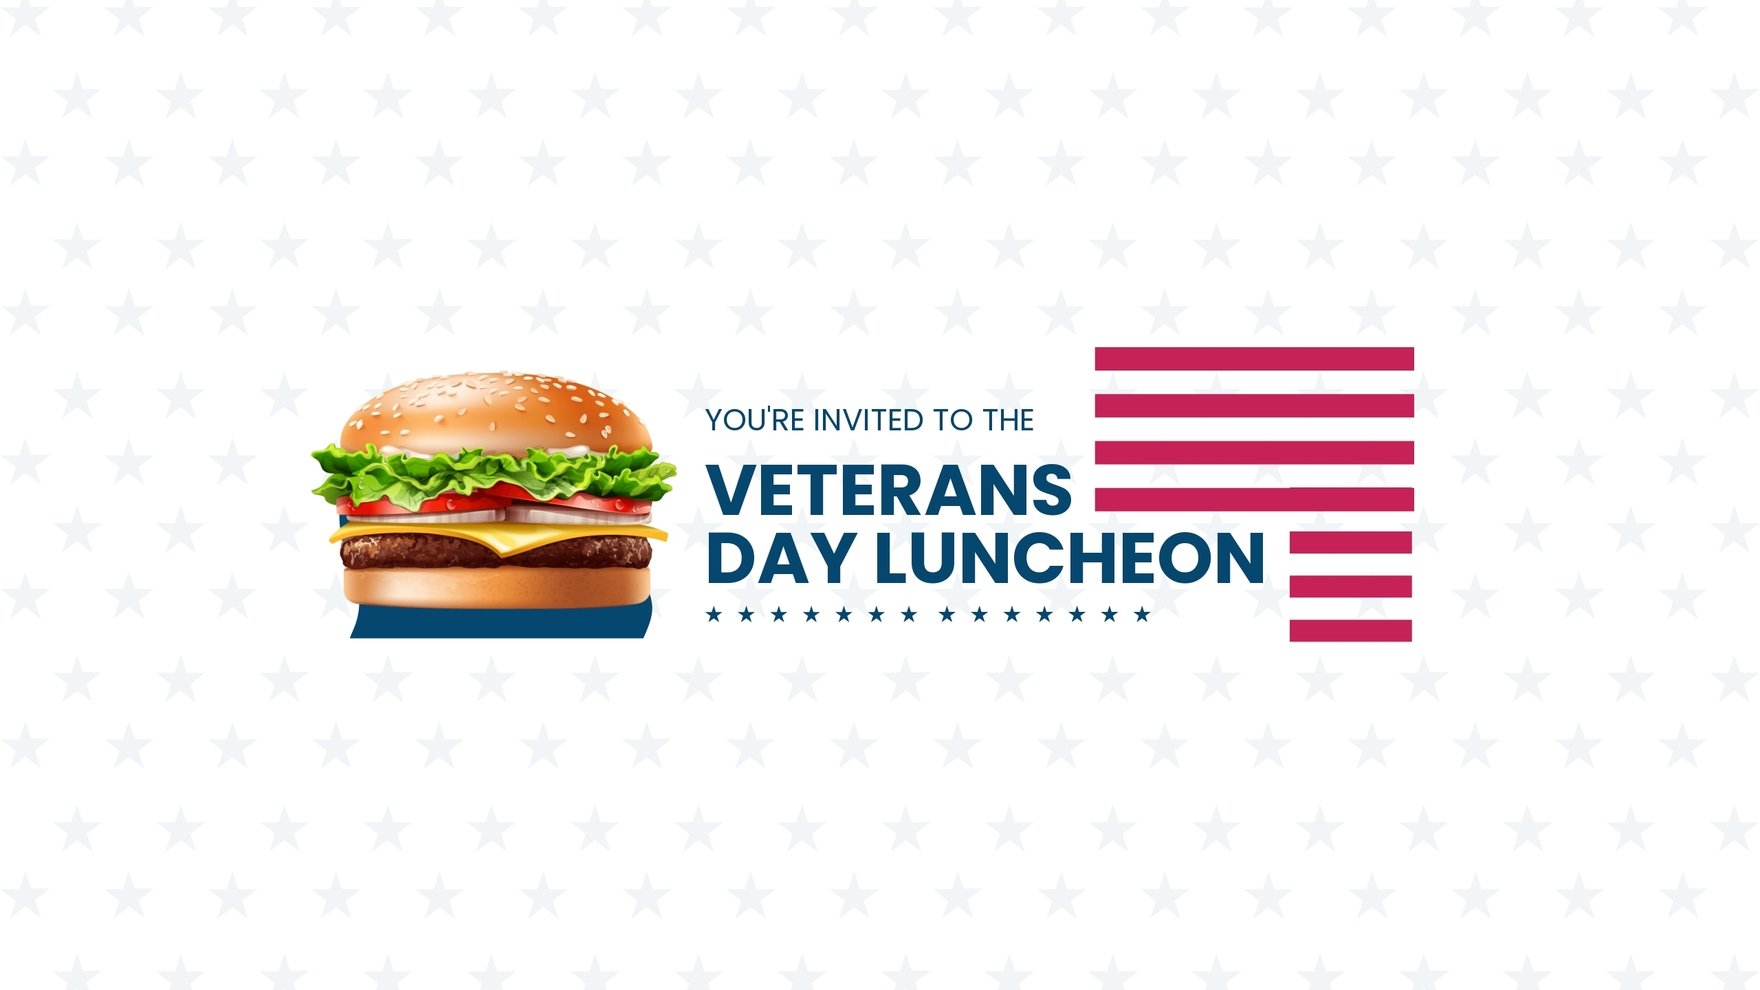 Veterans Day Luncheon Youtube Banner Template